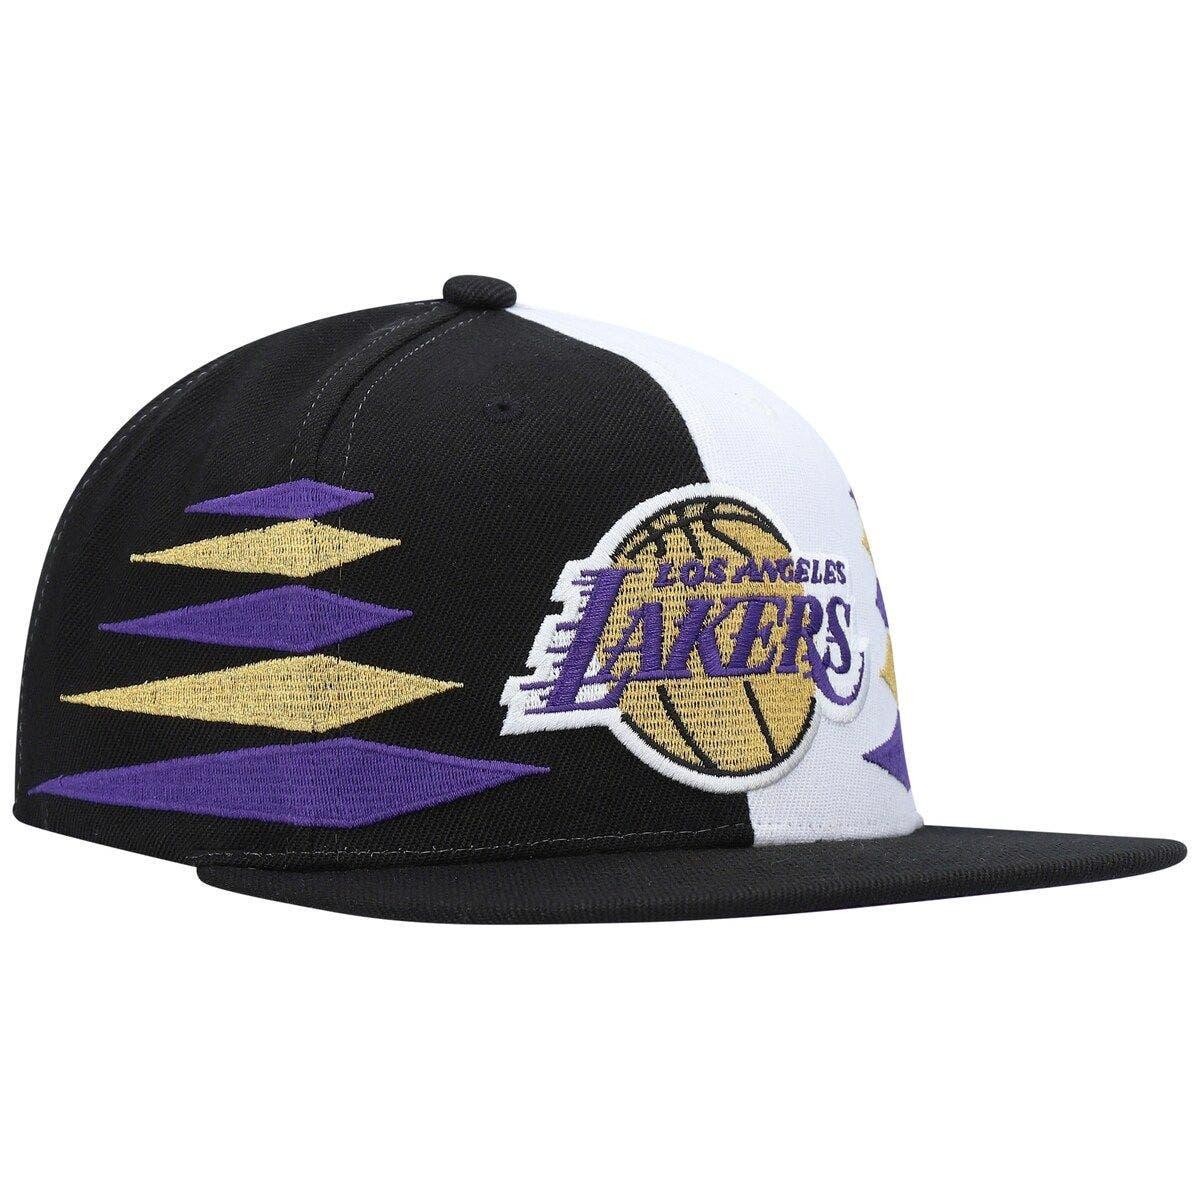 Los Angeles Lakers Women's Glitter 9FORTY Adjustable Hat